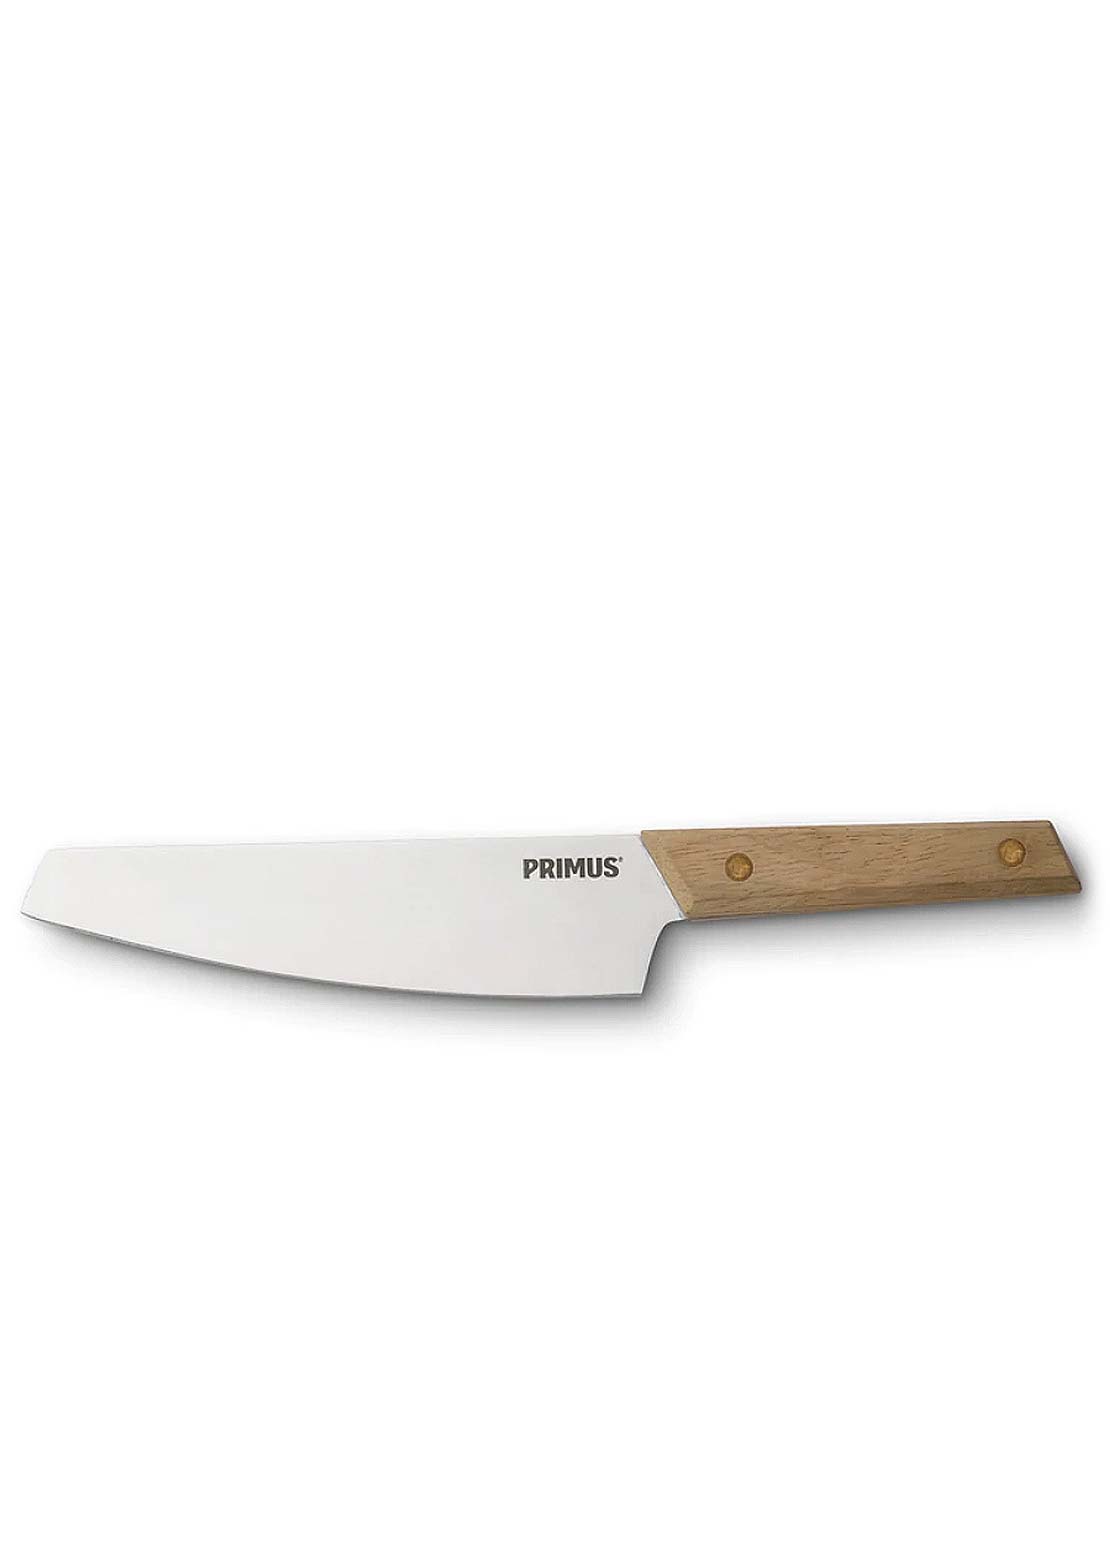 Primus Large Campfire Knife